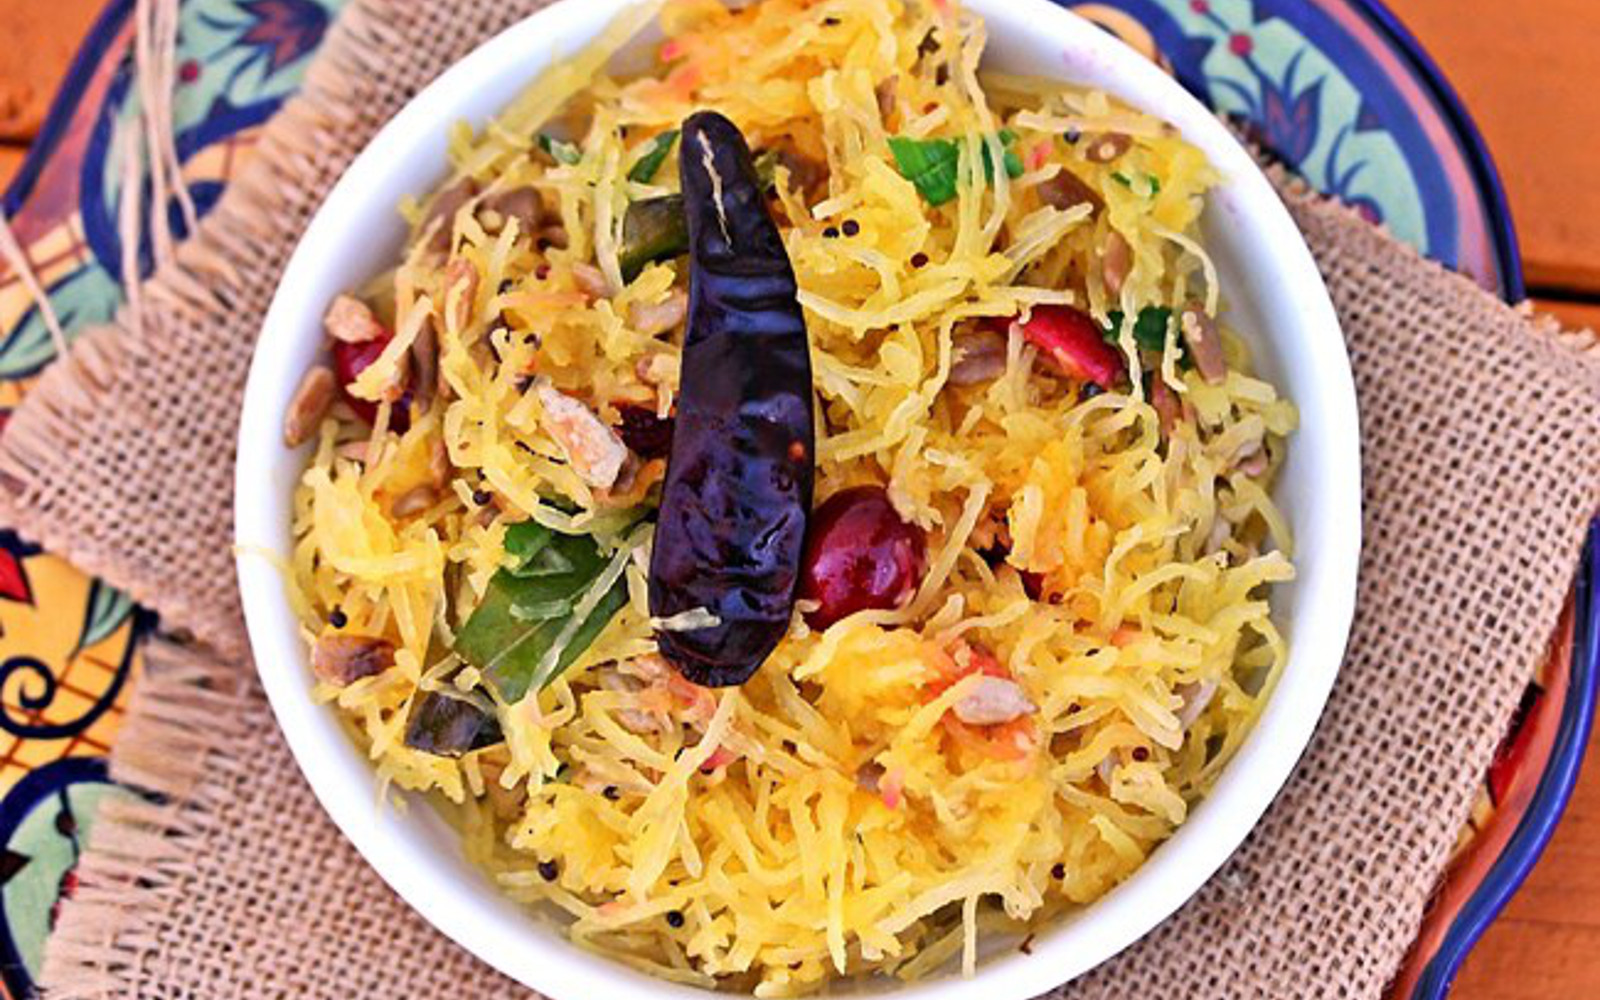 Vegan Spaghetti Squash With Toasted Mustard Seeds and Cranberries